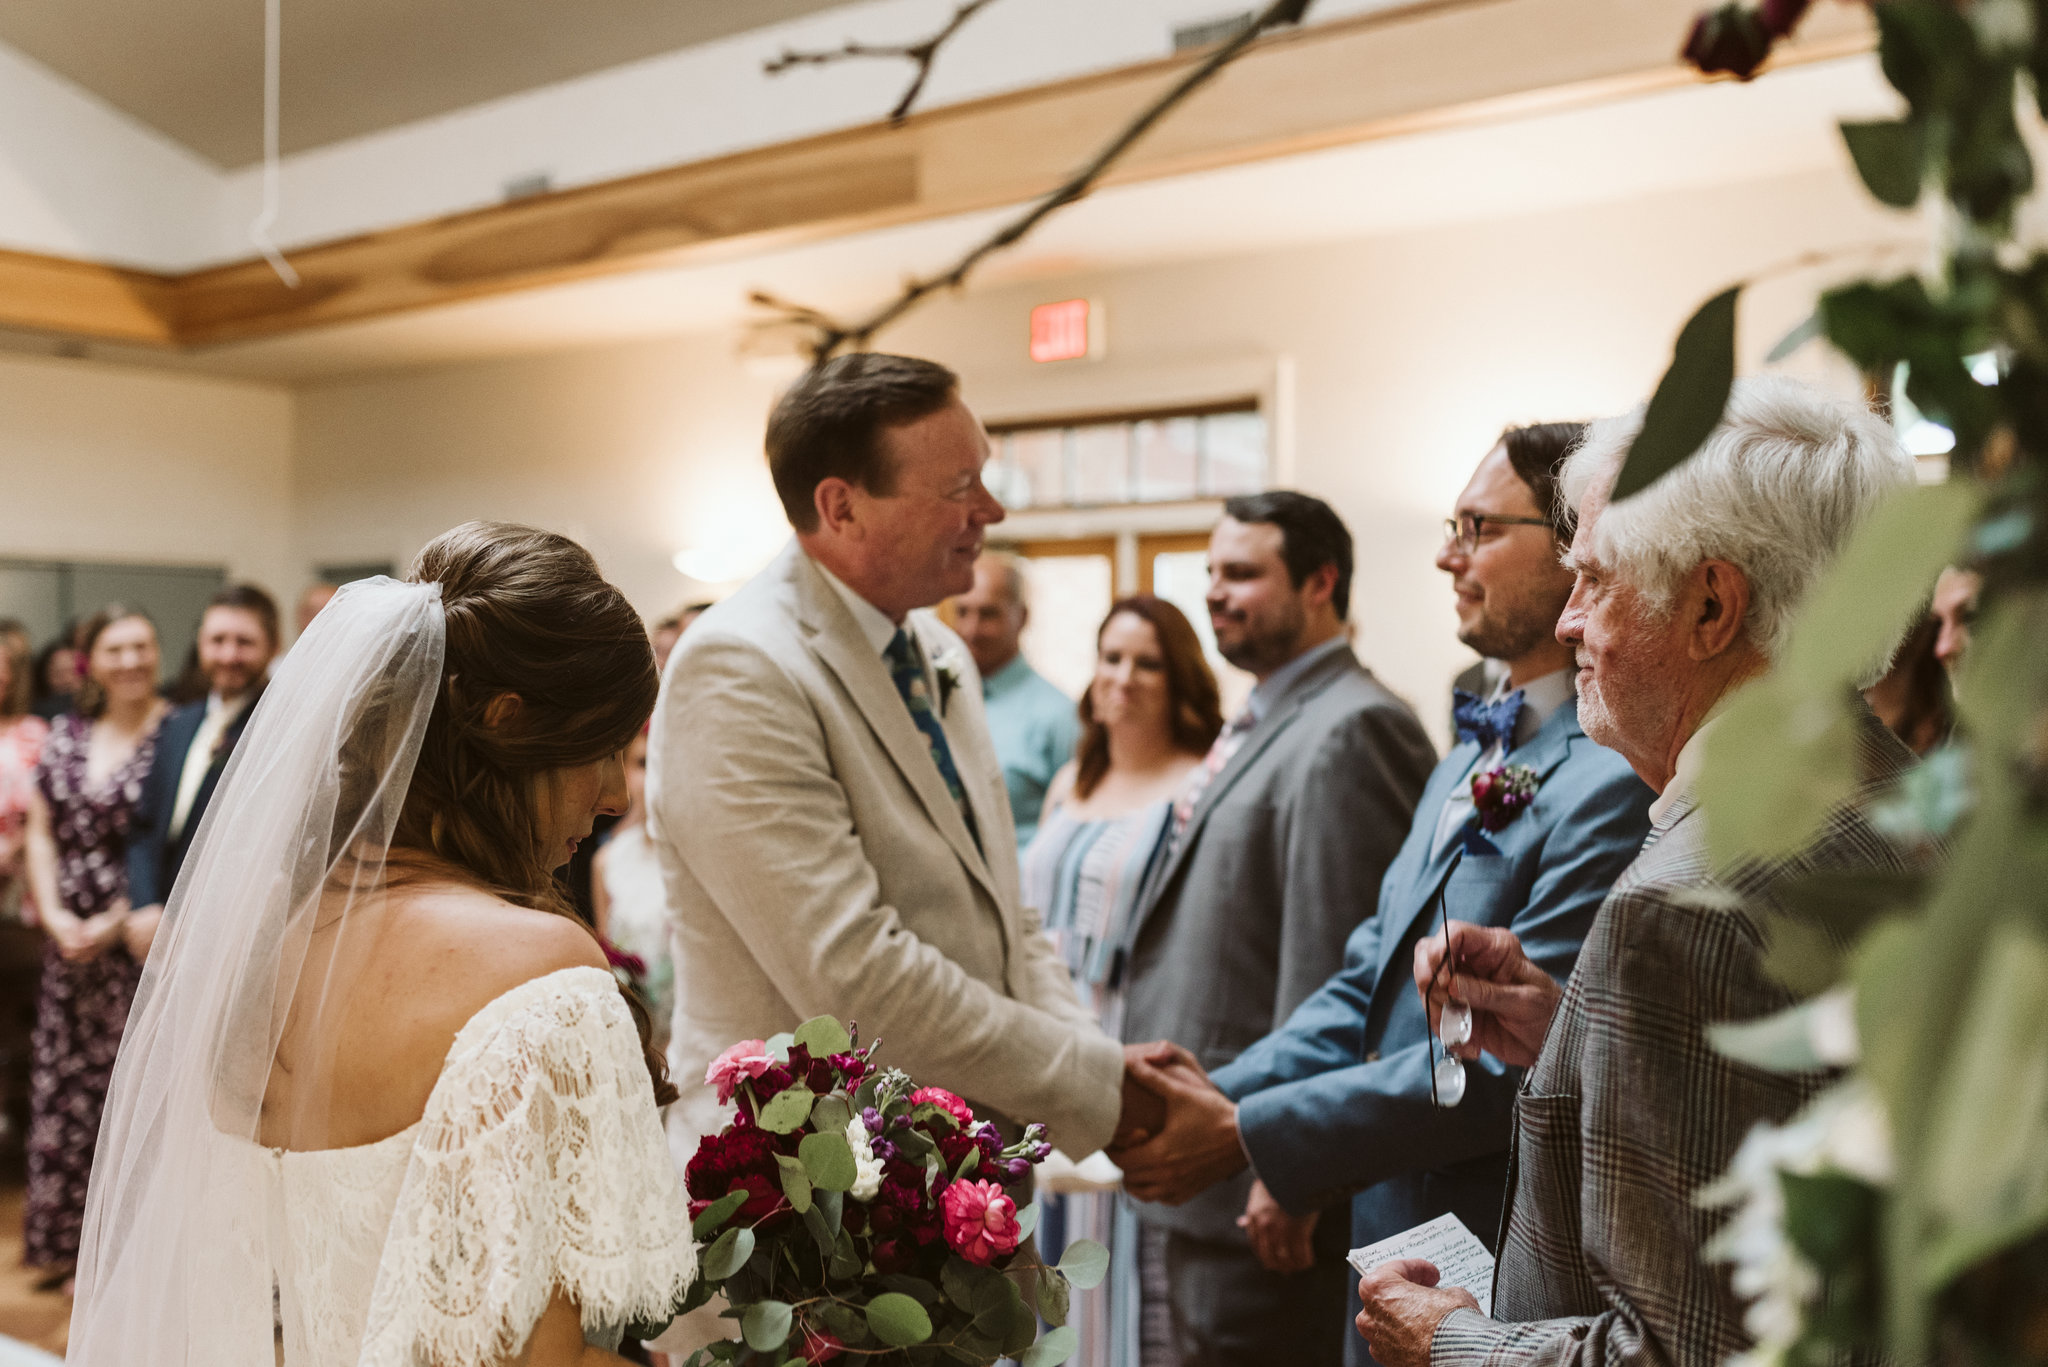  Annapolis, Quaker Wedding, Baltimore Wedding Photographer, Intimate, Small Wedding, Vintage, DIY, Father of the Bride Shaking Groom’s Hand 